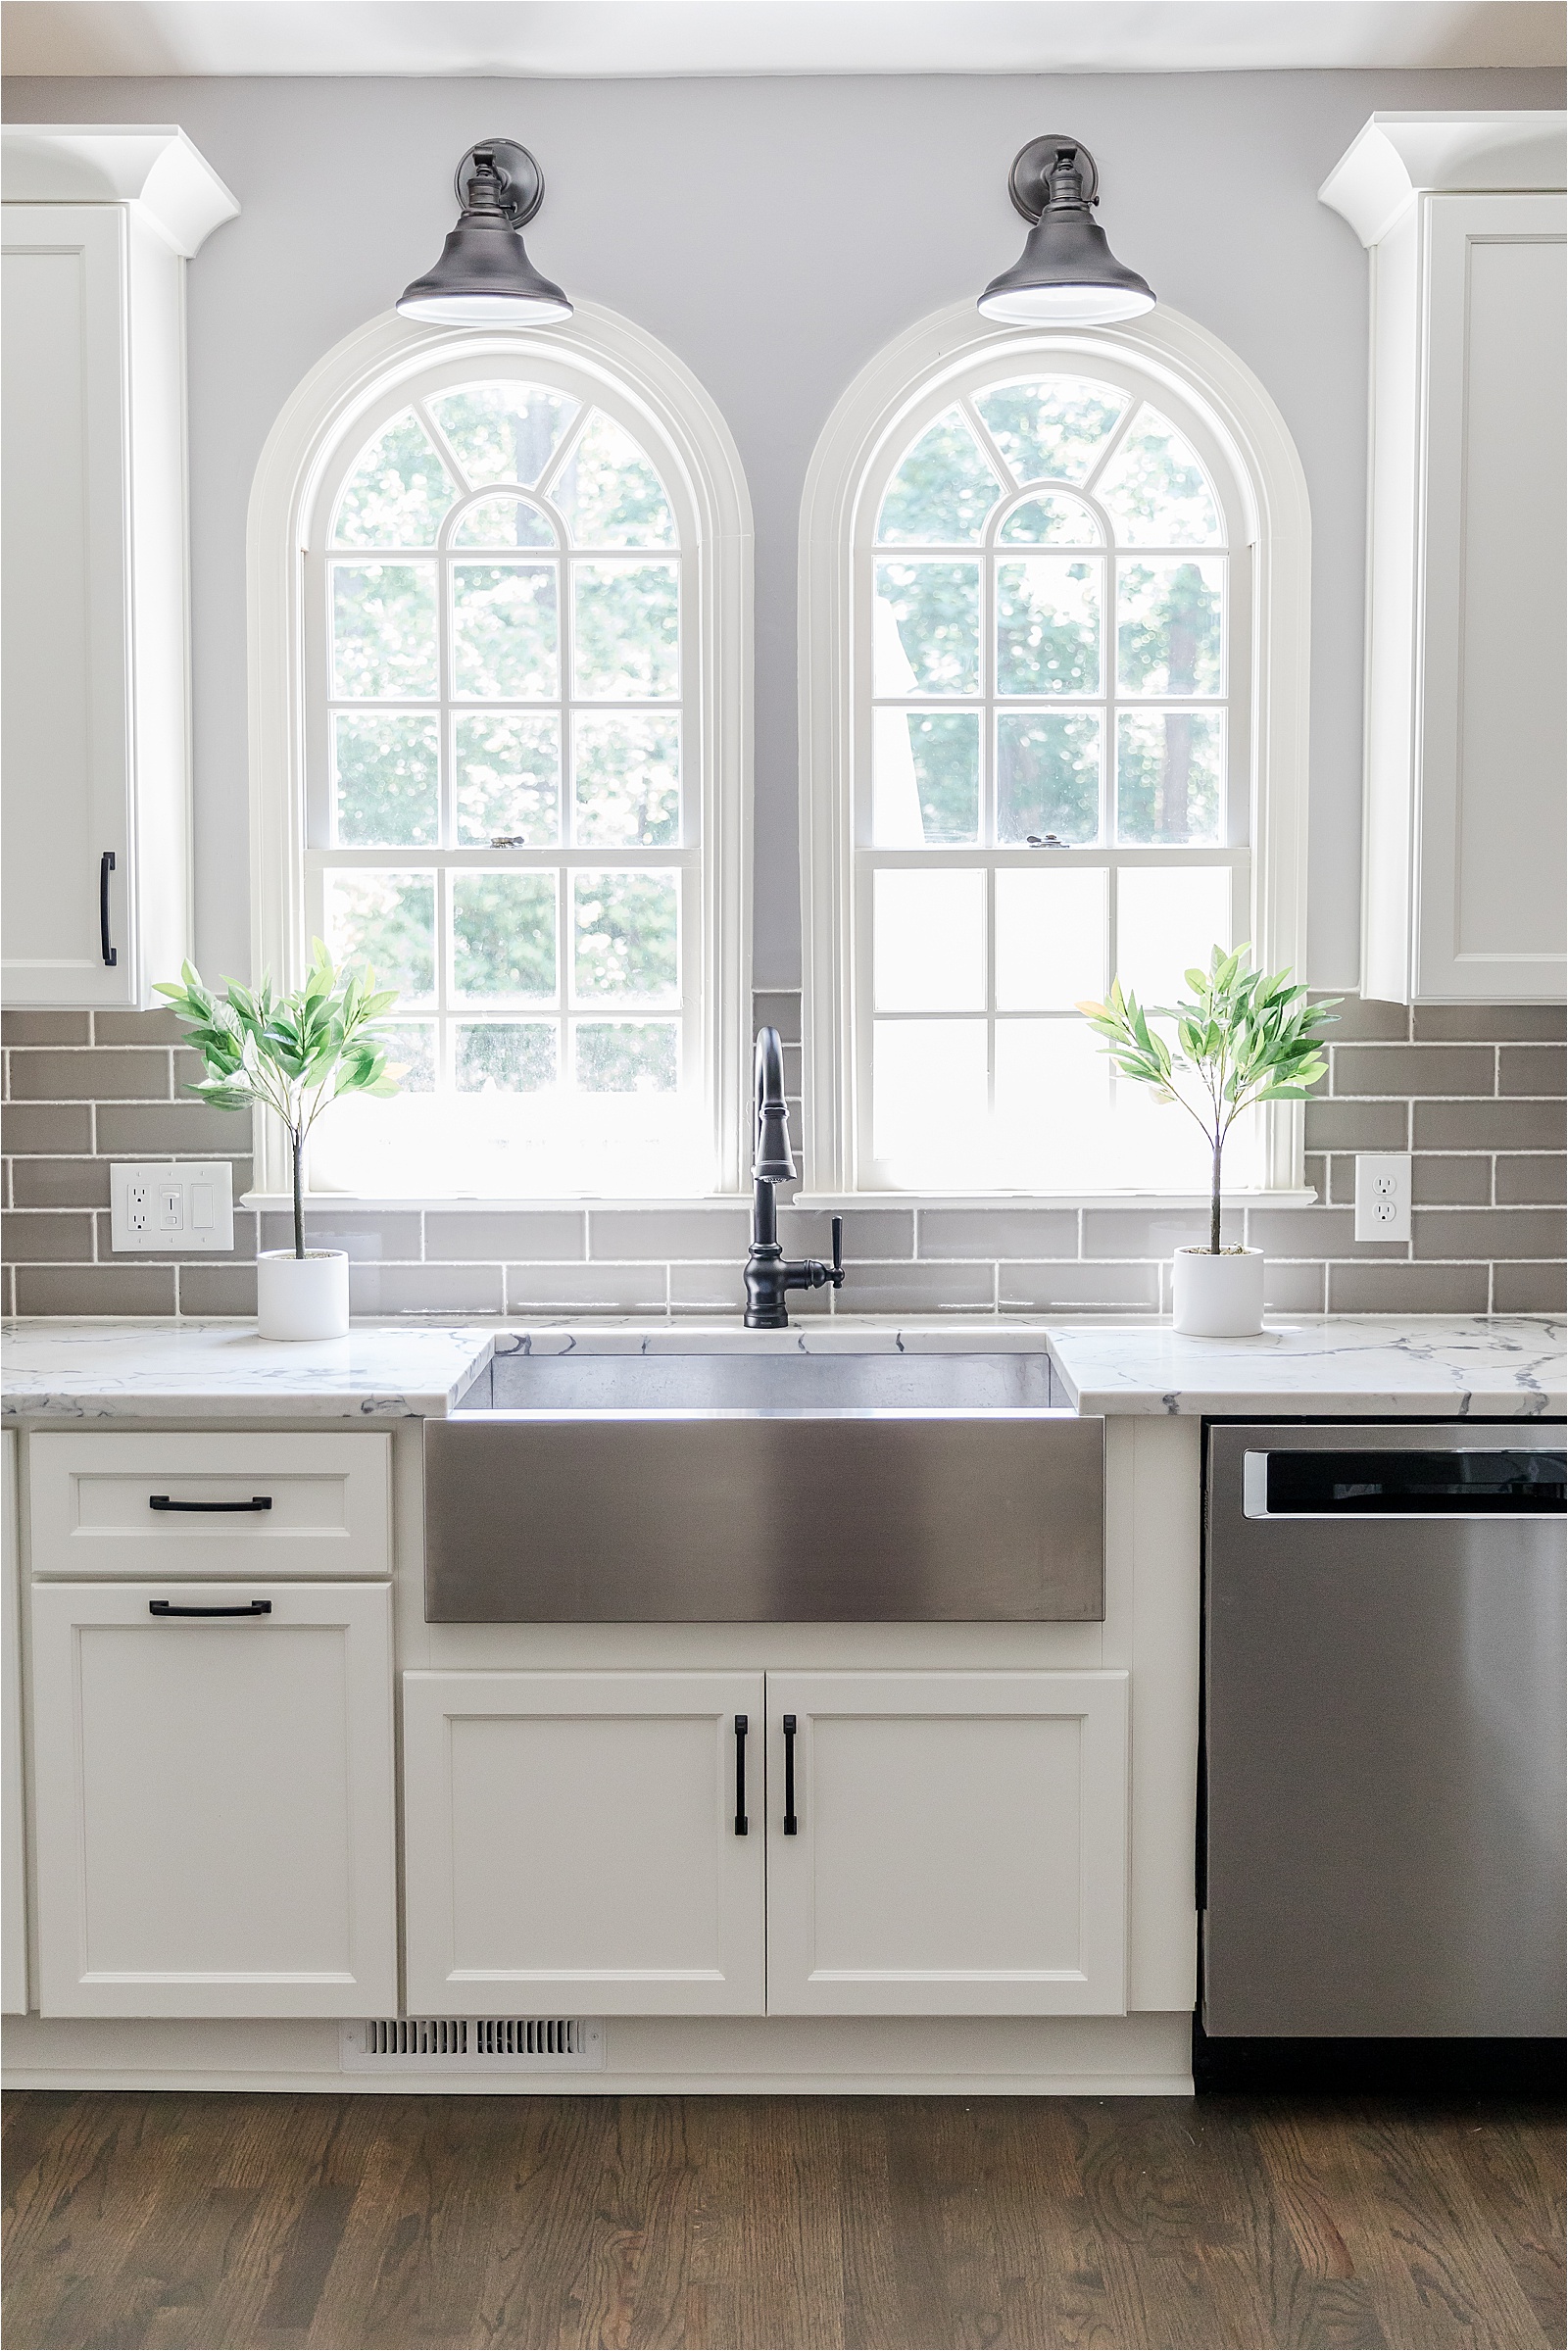 two arched windows above stainless steel farm sink